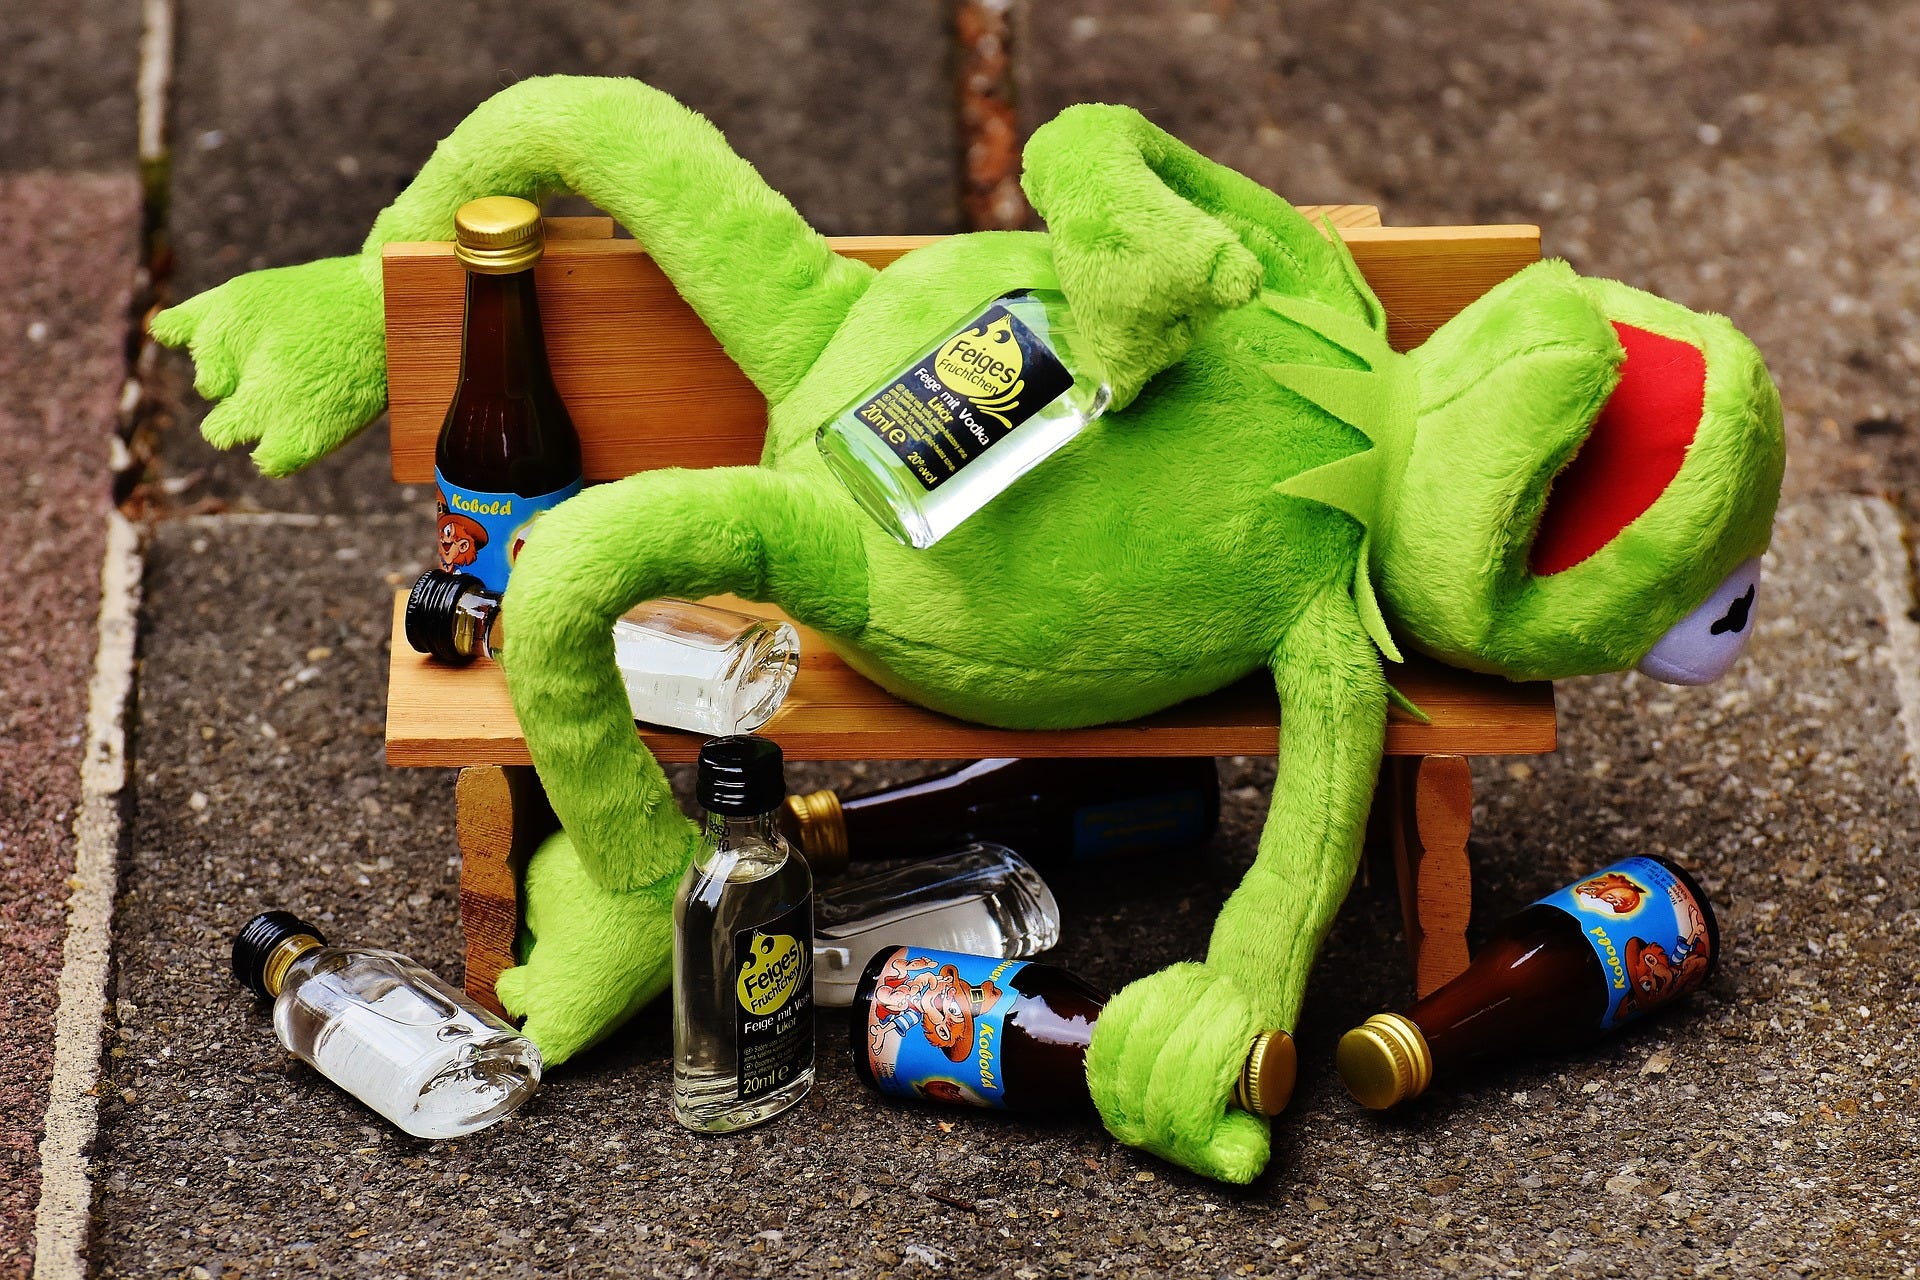 A Drunk Muppet is Very Sorry. With ma stomach rolling off ...